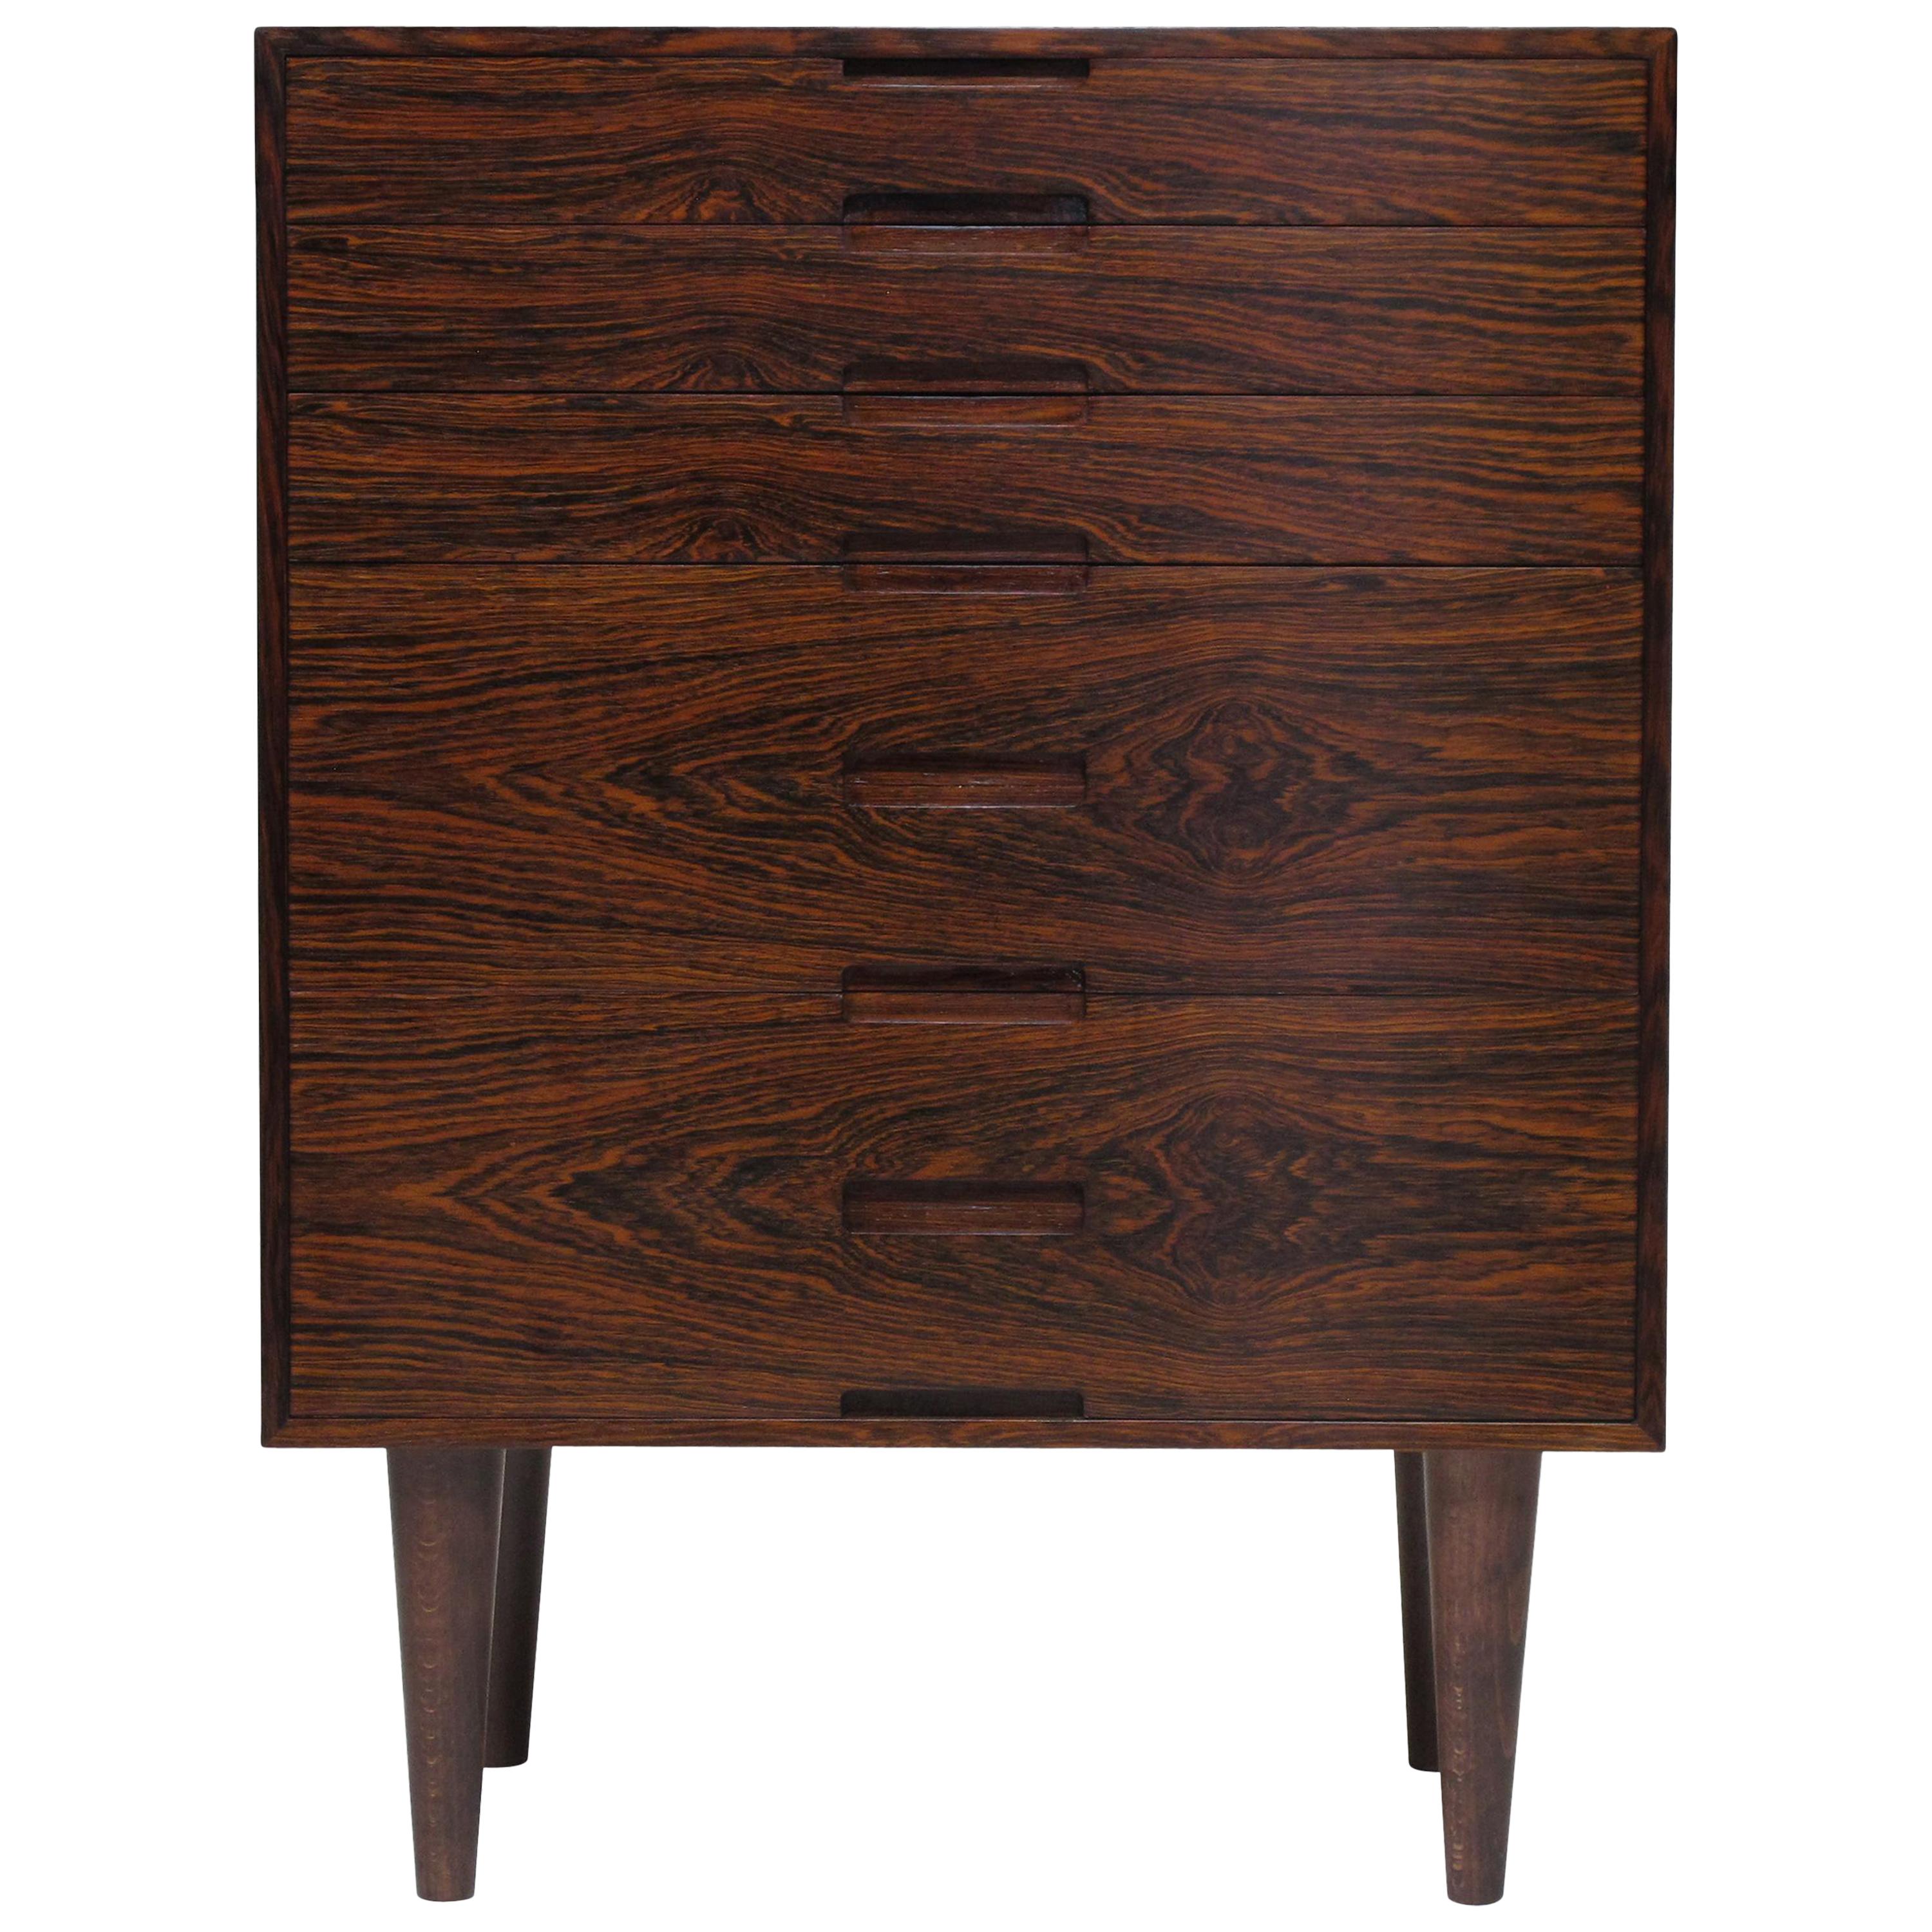 Pair of midcentury chest of drawers handcrafted of dark Brazilian rosewood. Each with mitered corners and series of five drawers with inset pulls, raised on tapered legs. Dynamic grained rosewood with pattern match down front of drawers. Interior